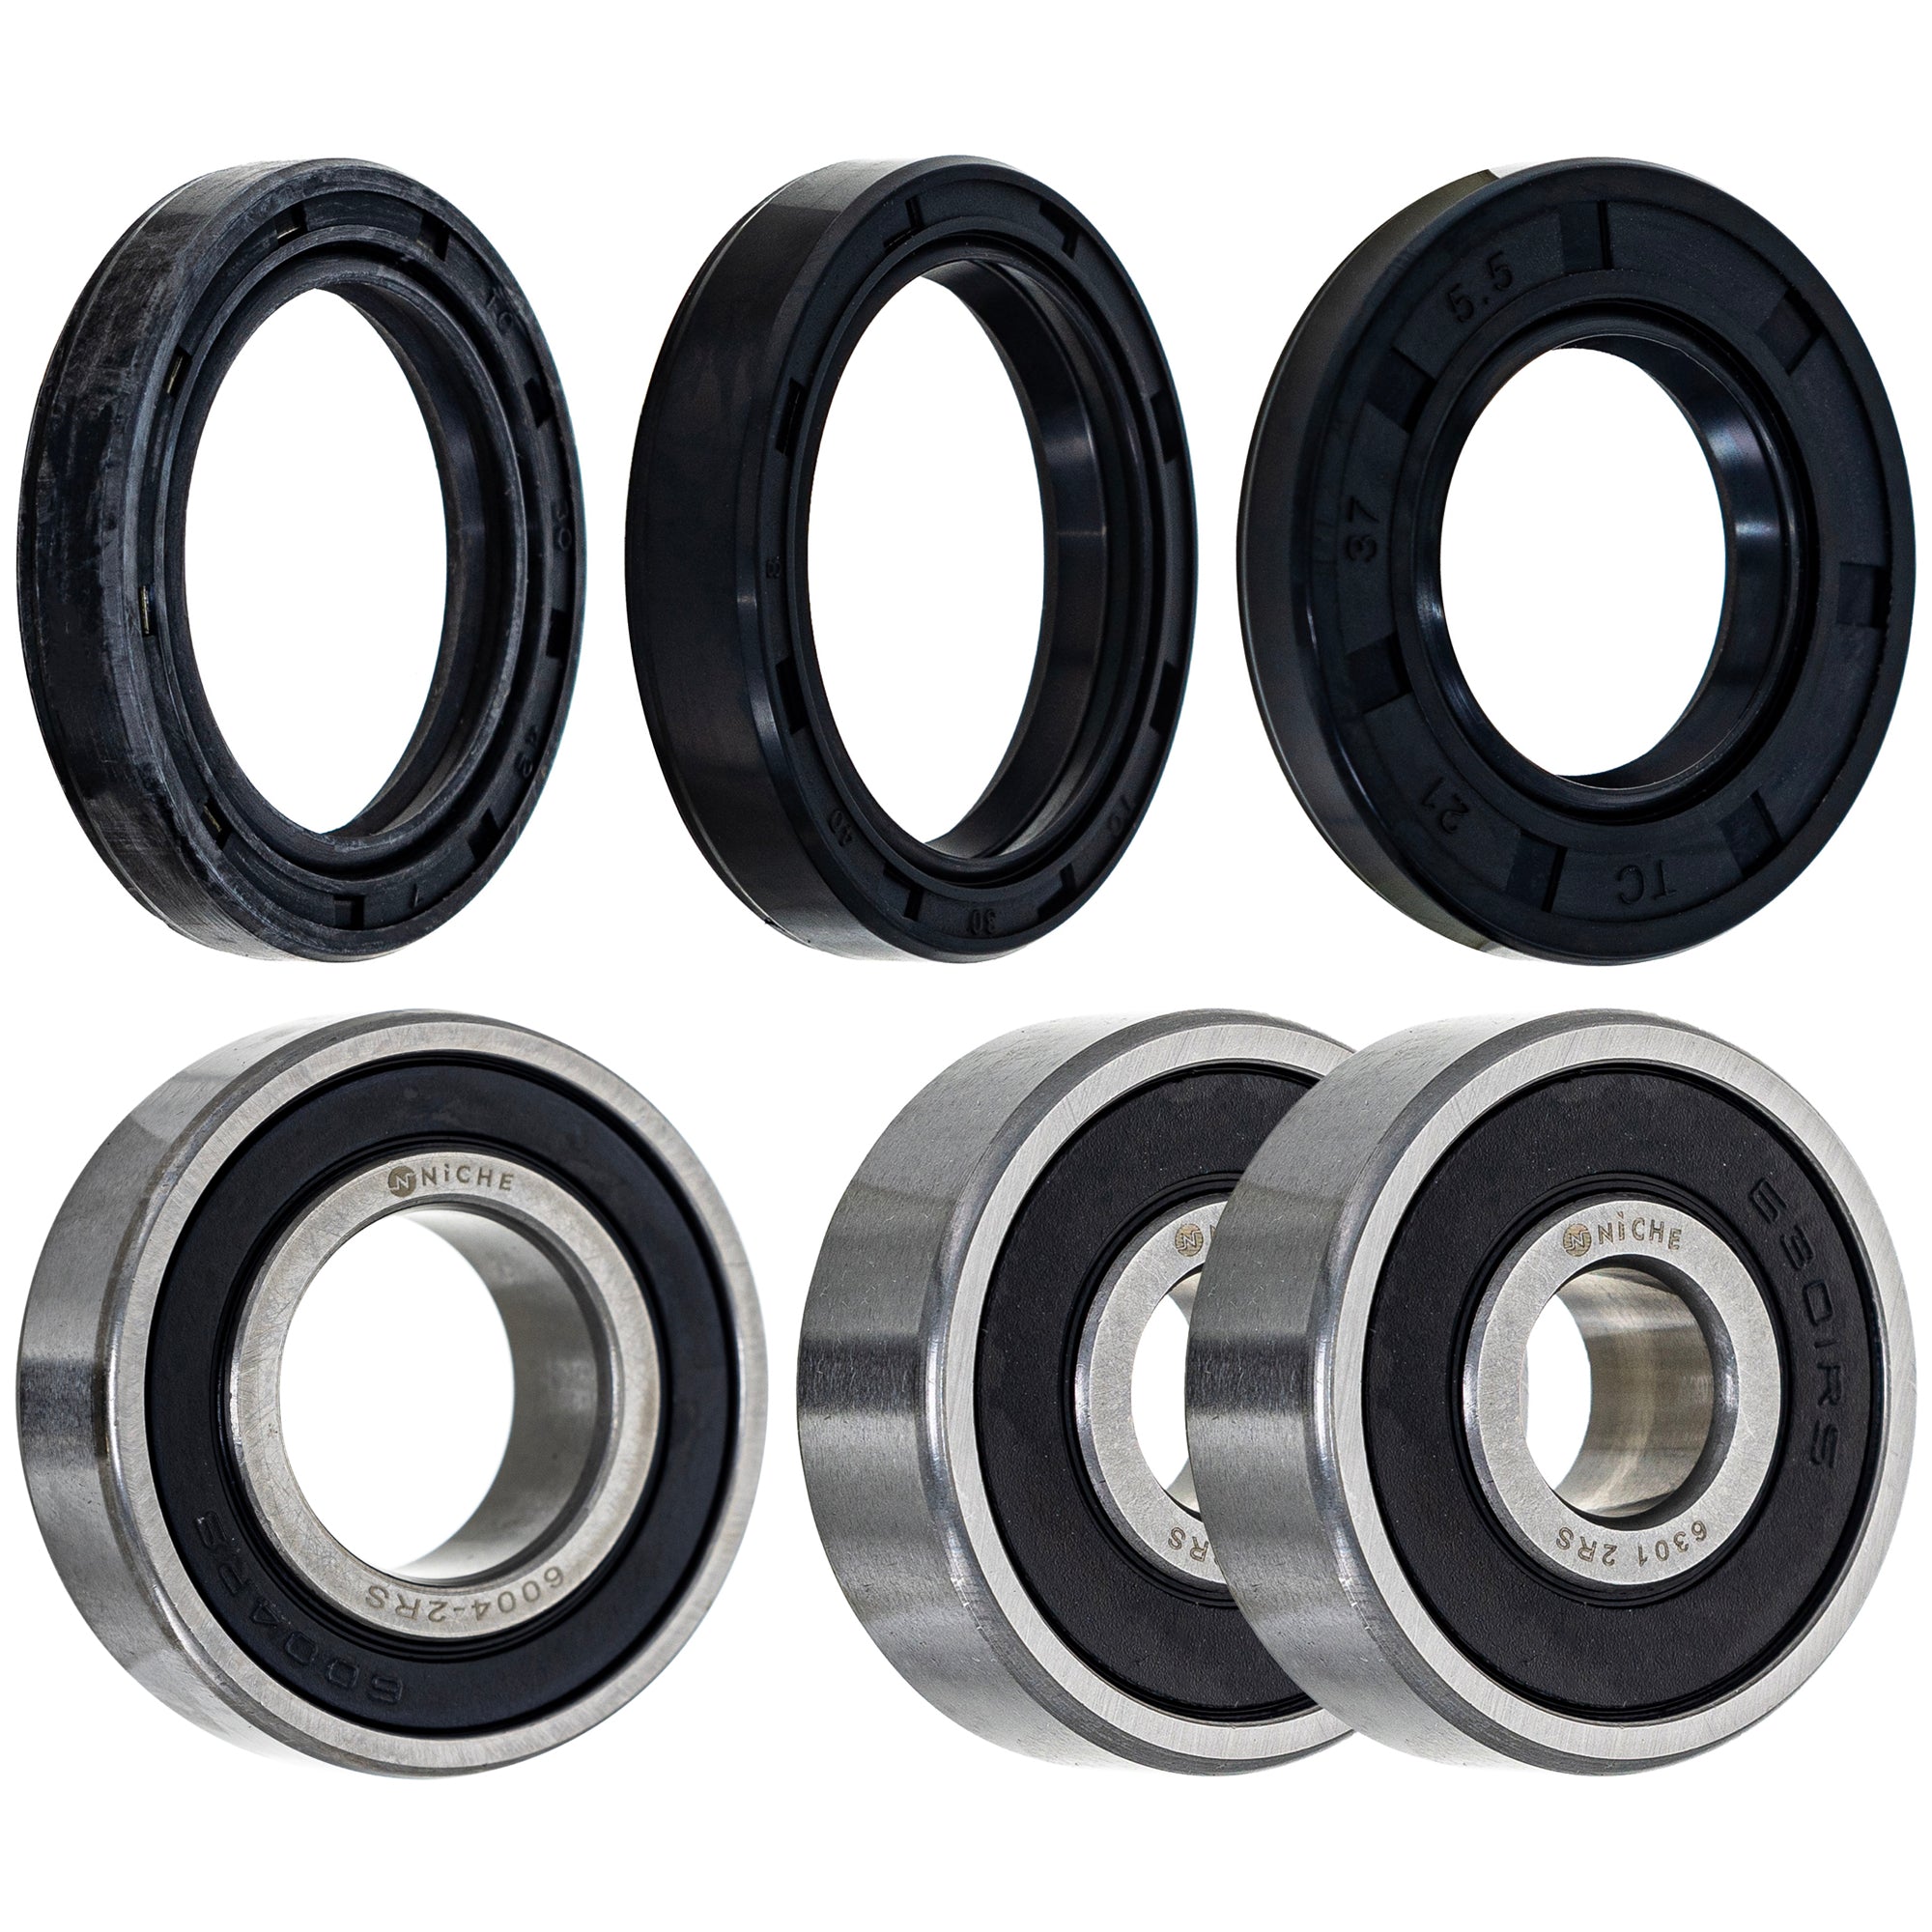 Wheel Bearing Seal Kit for zOTHER Ref No TTR90 RS100 NICHE MK1008839